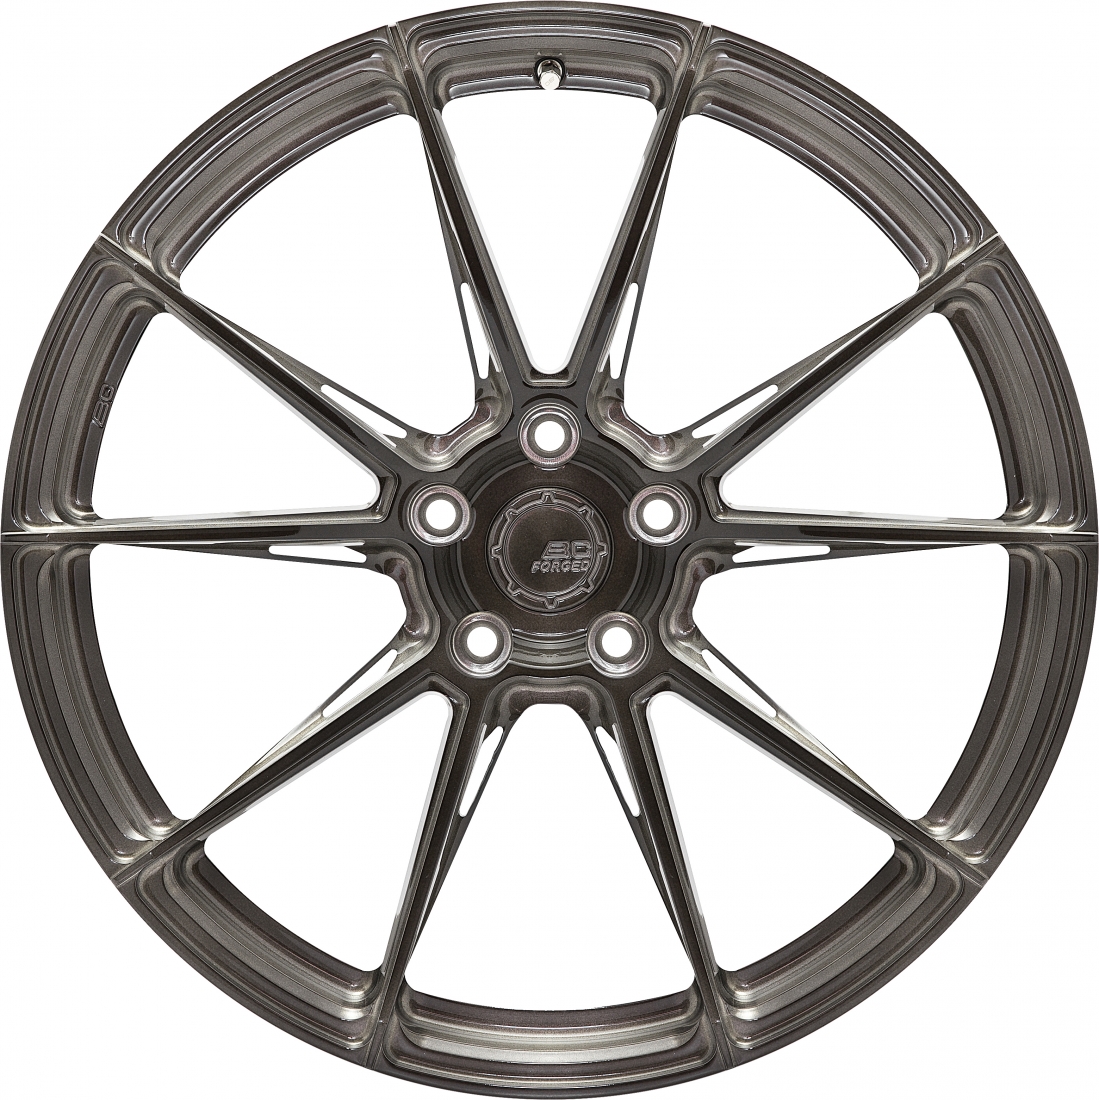 2020-23 BC Forged EH182 Wheels for C8 Corvette, Set of 4